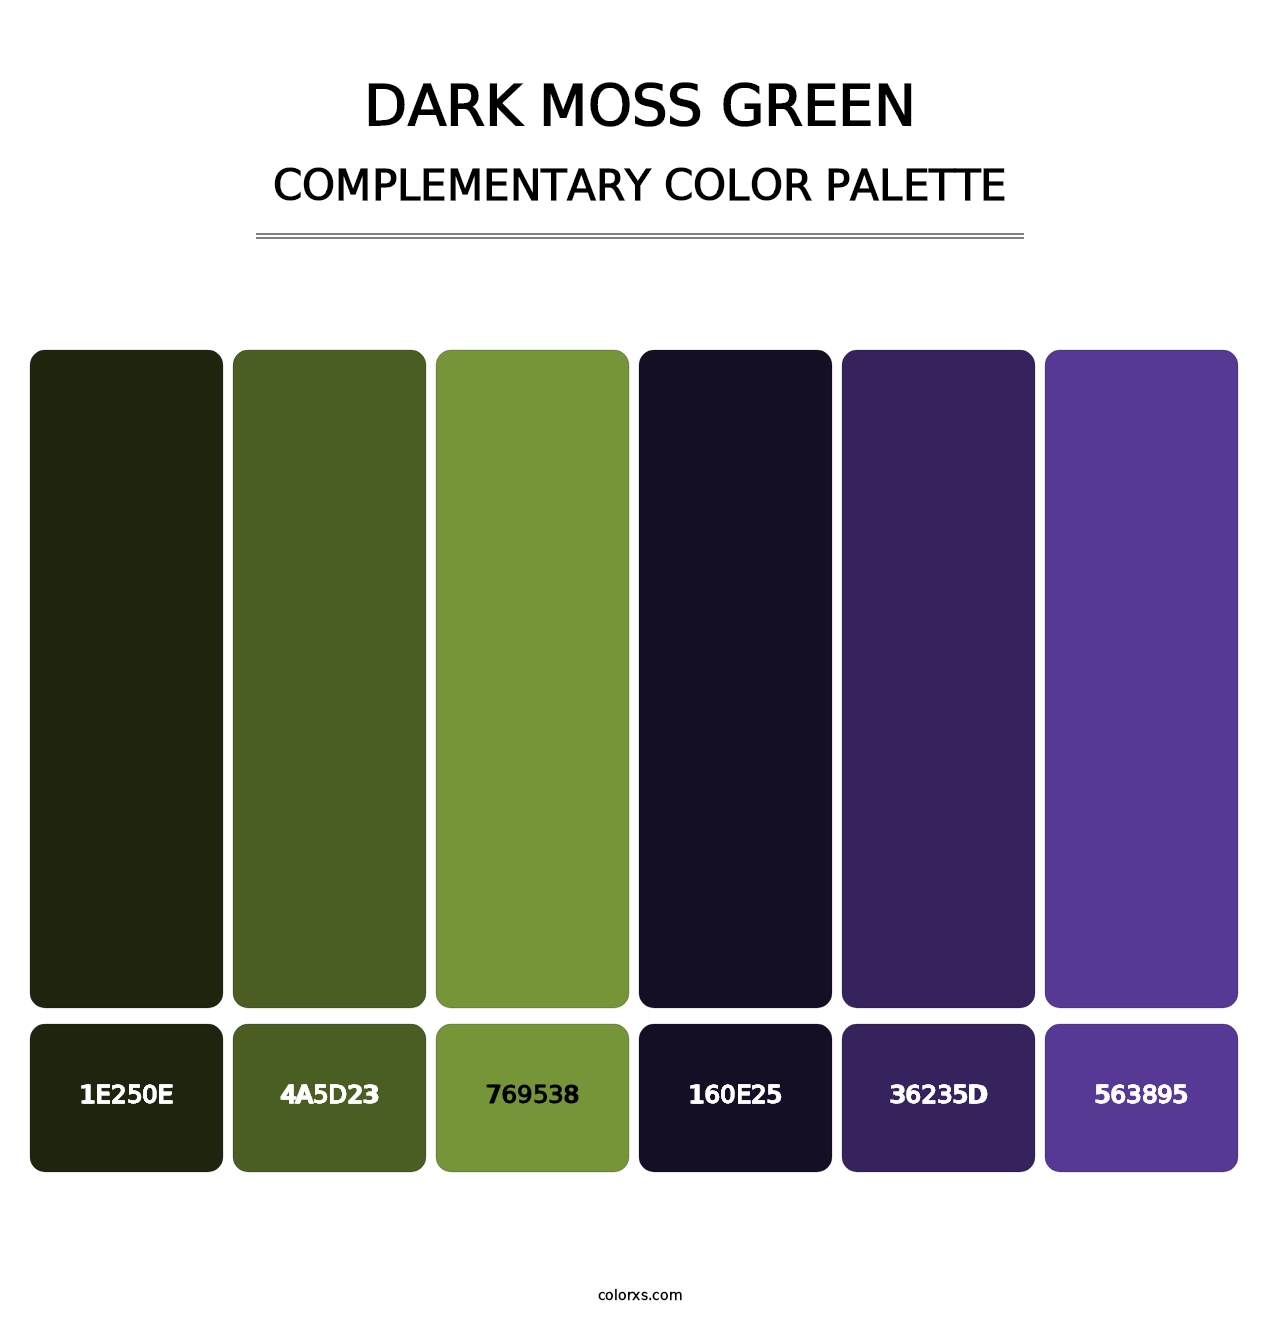 Dark Moss Green - Complementary Color Palette